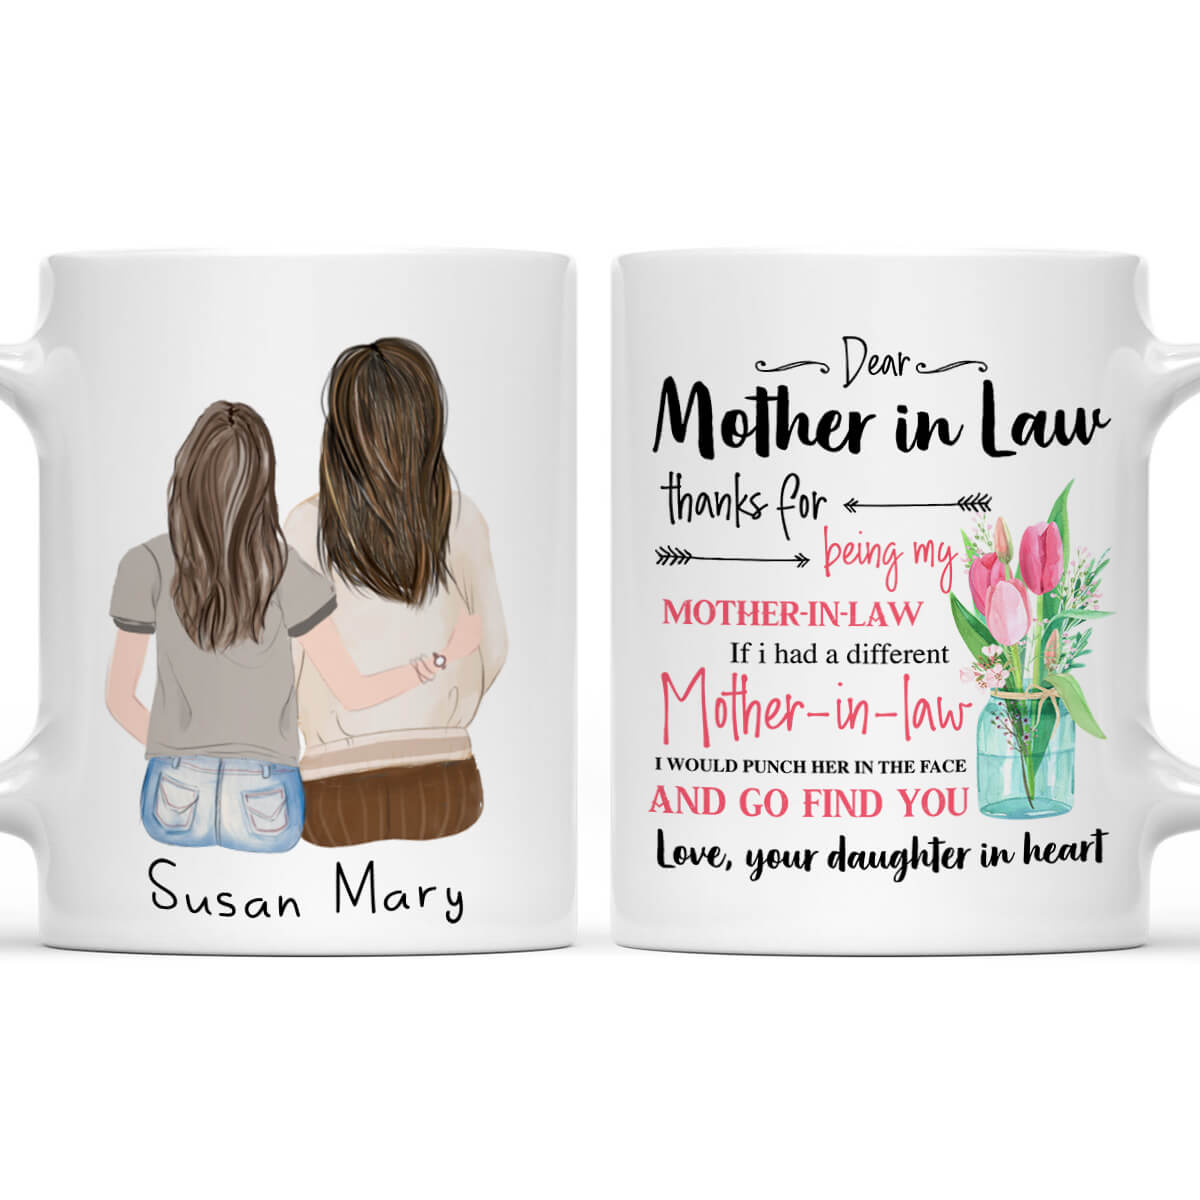 Thank You For Being The Best Mother Mug Gift For Mom